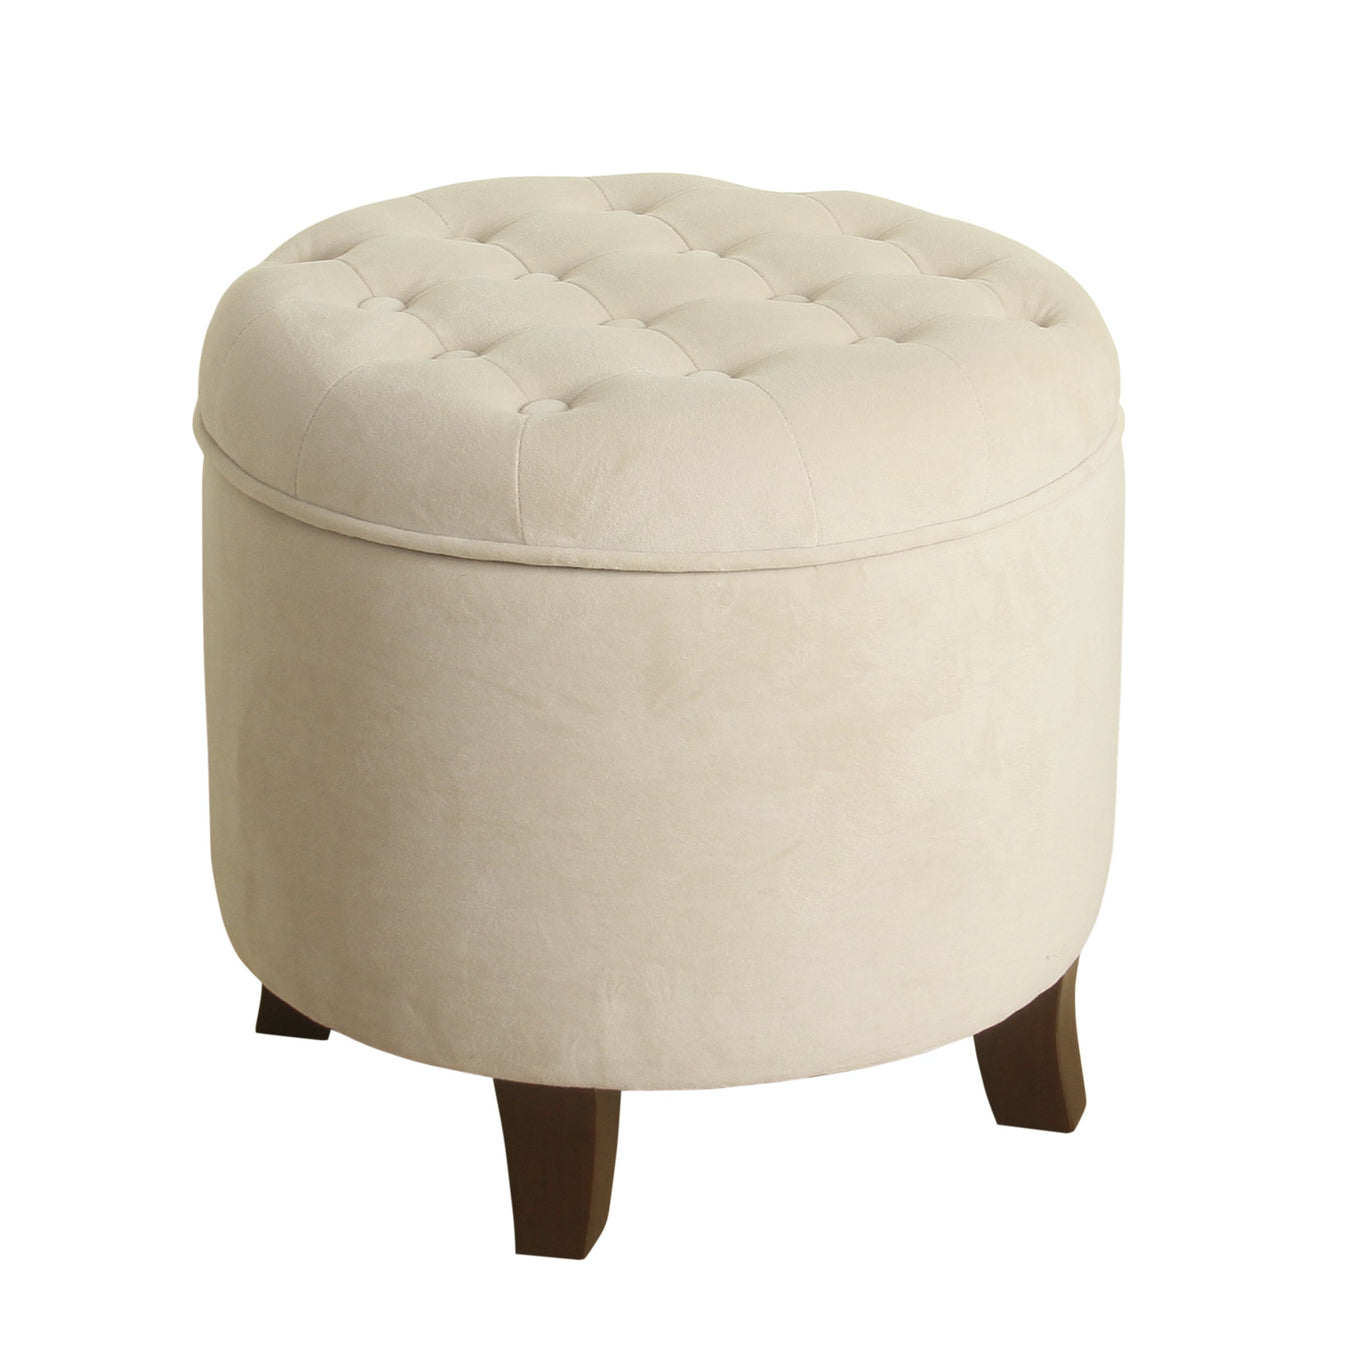 Functional Storage Ottoman Collection